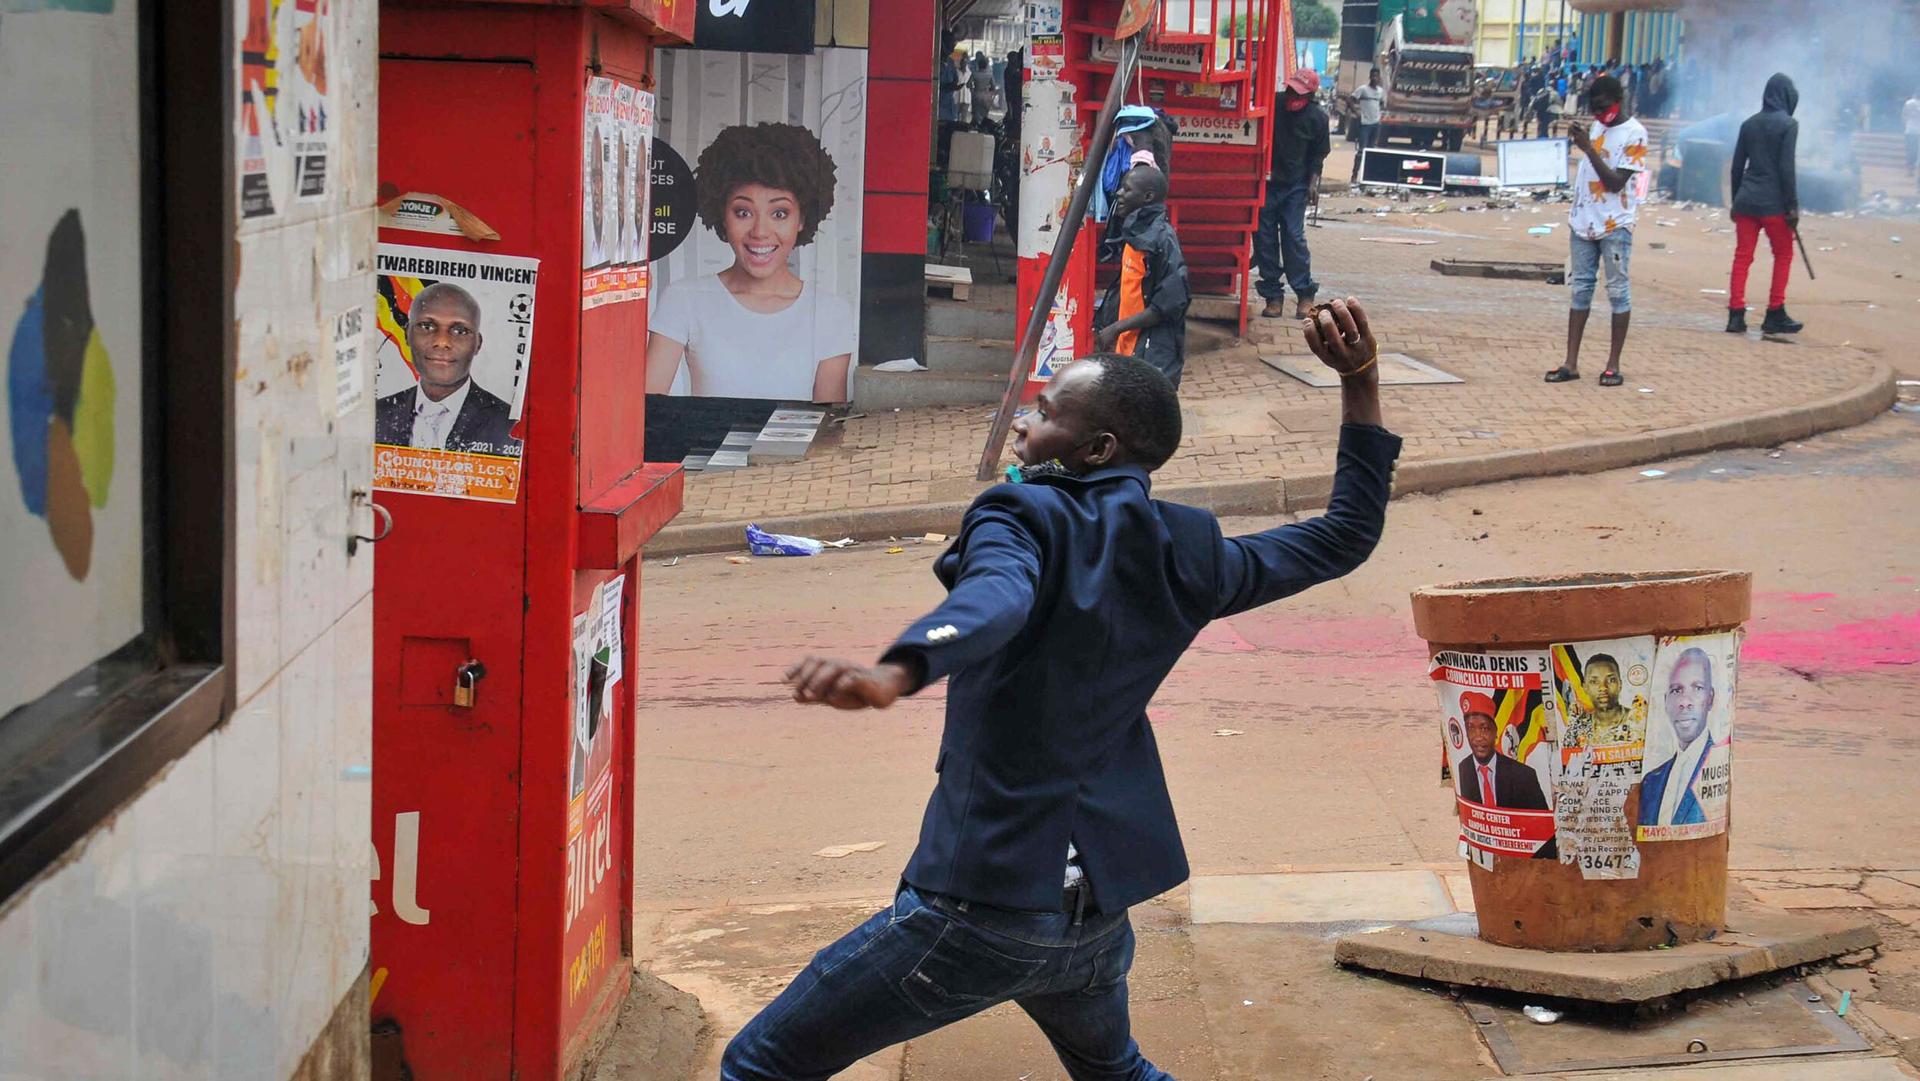 A person prepares to throw a rock during clashes between security forces and protesters supporting opposition presidential candidate Bobi Wine, in downtown Kampala, Uganda, Nov. 18, 2020.